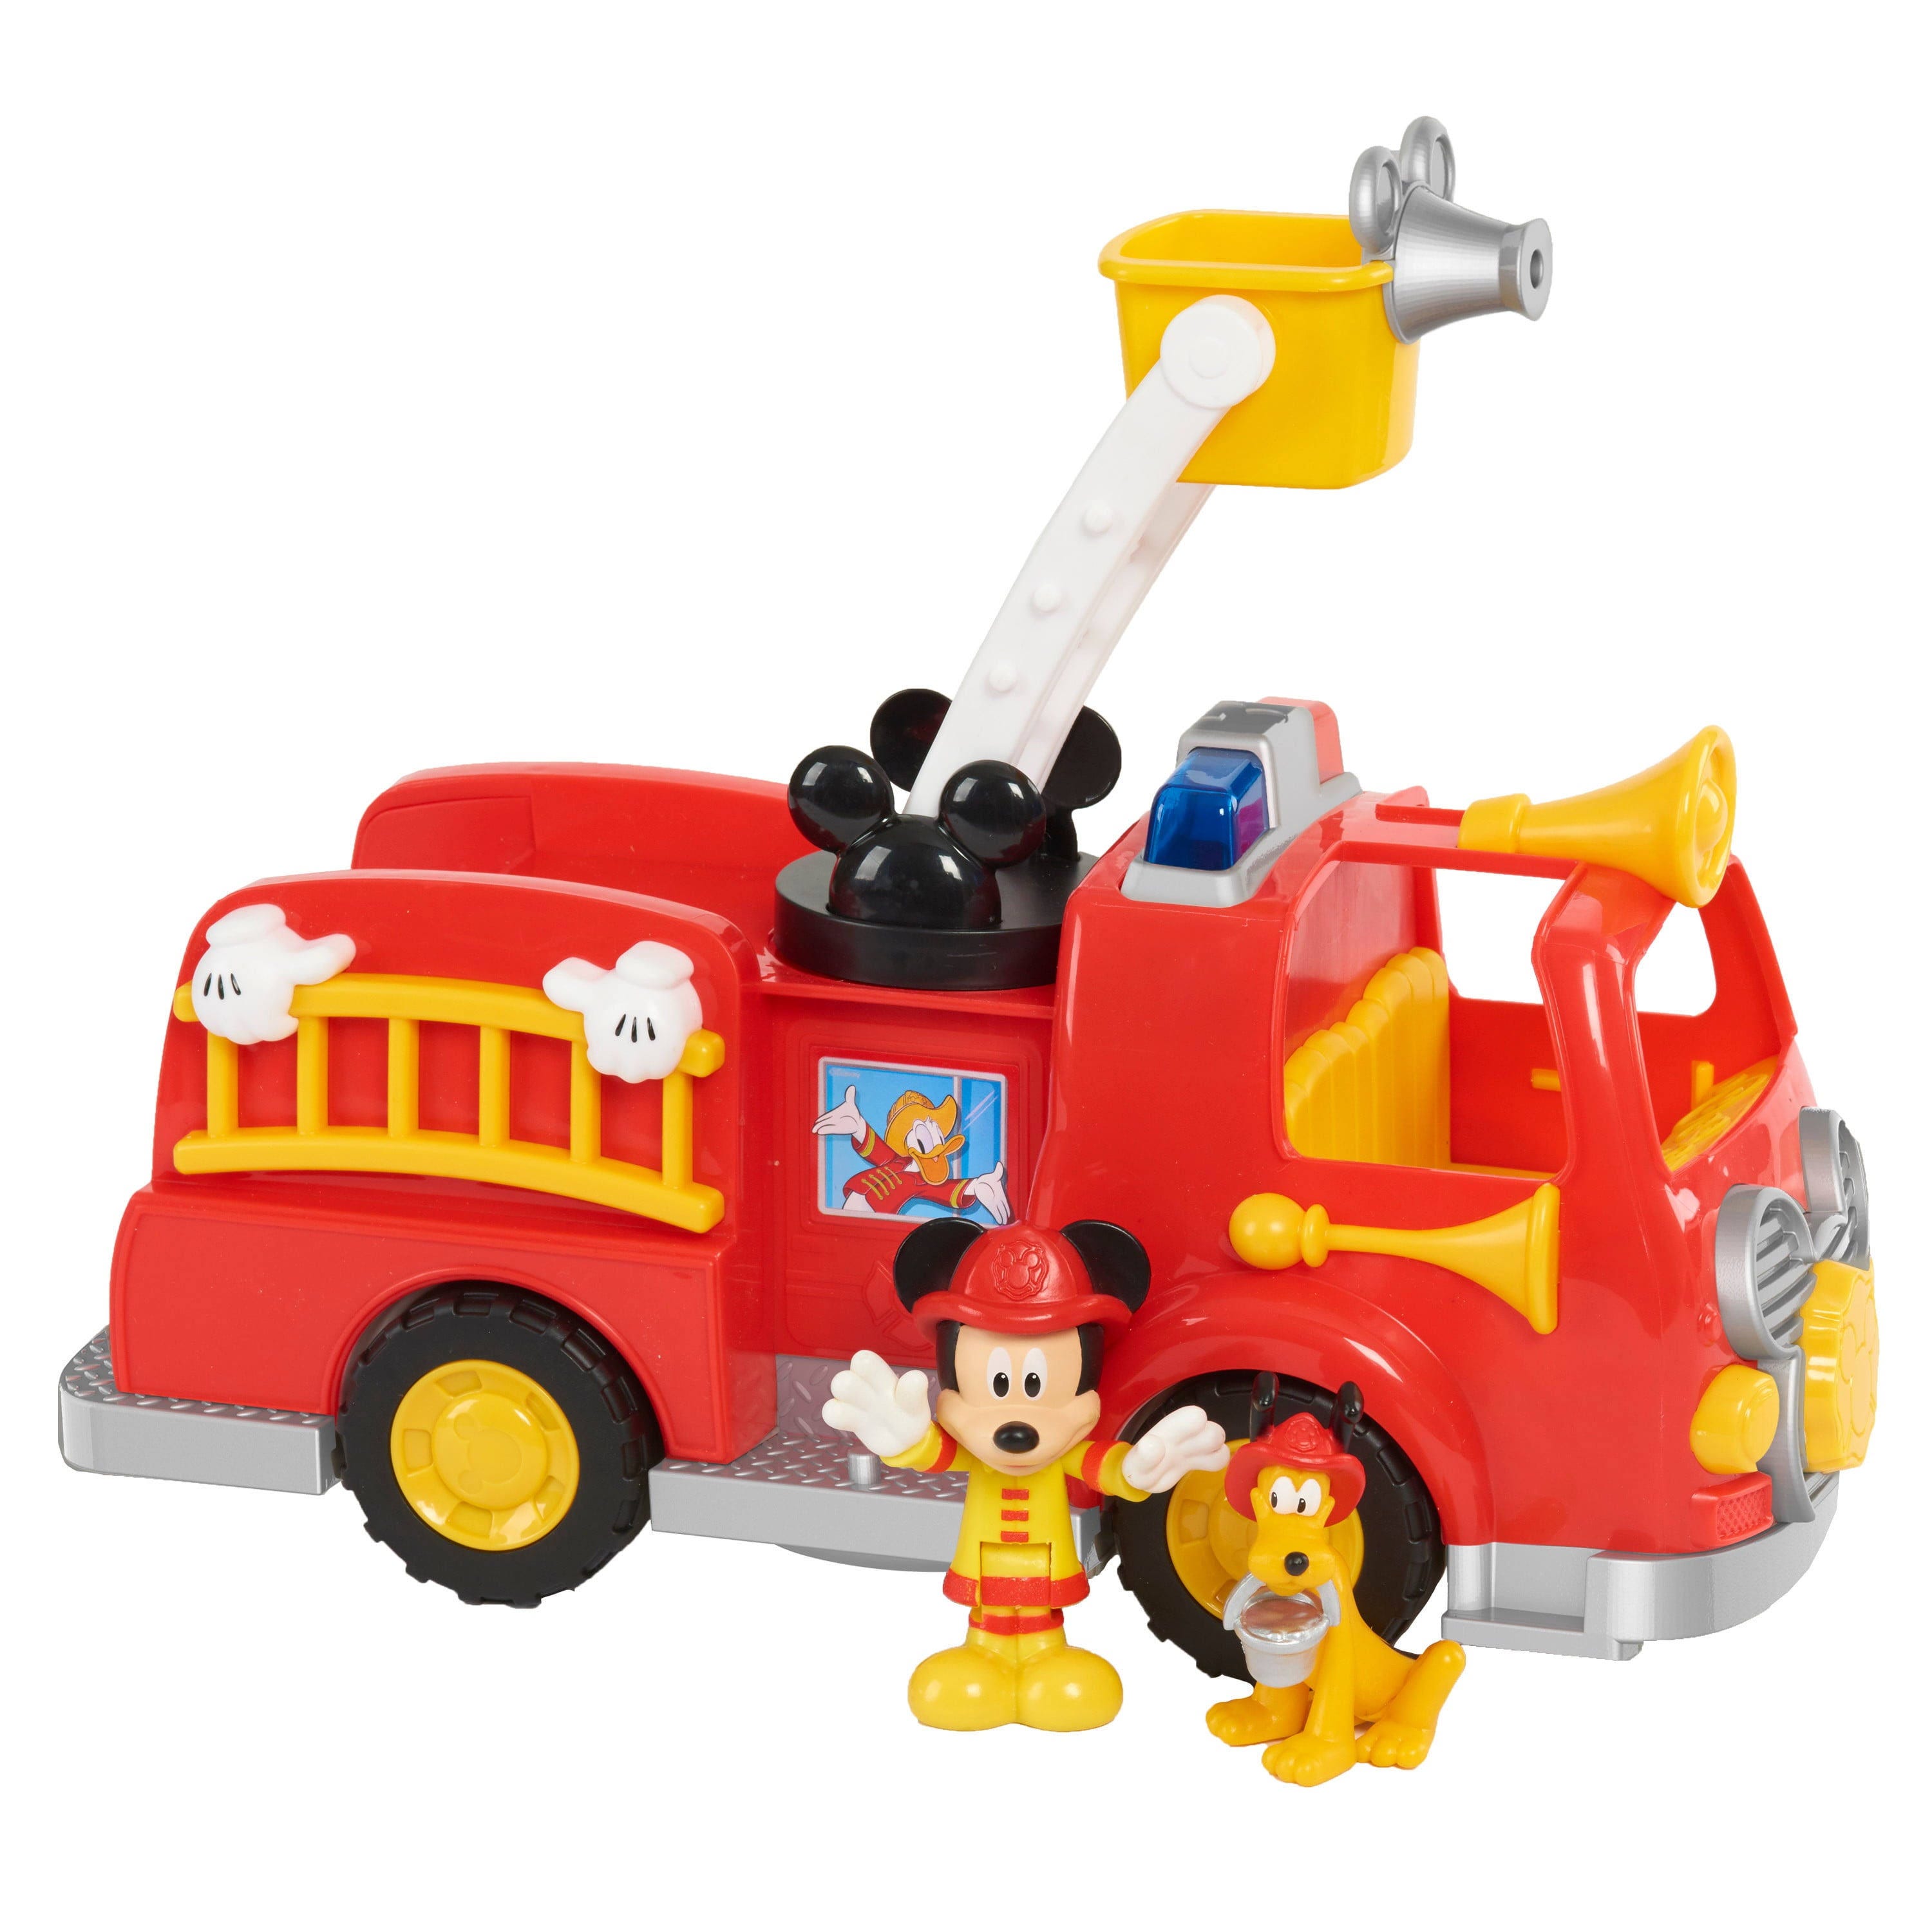 Mickey Mouse's Rescue Fire Truck Adventure | Image